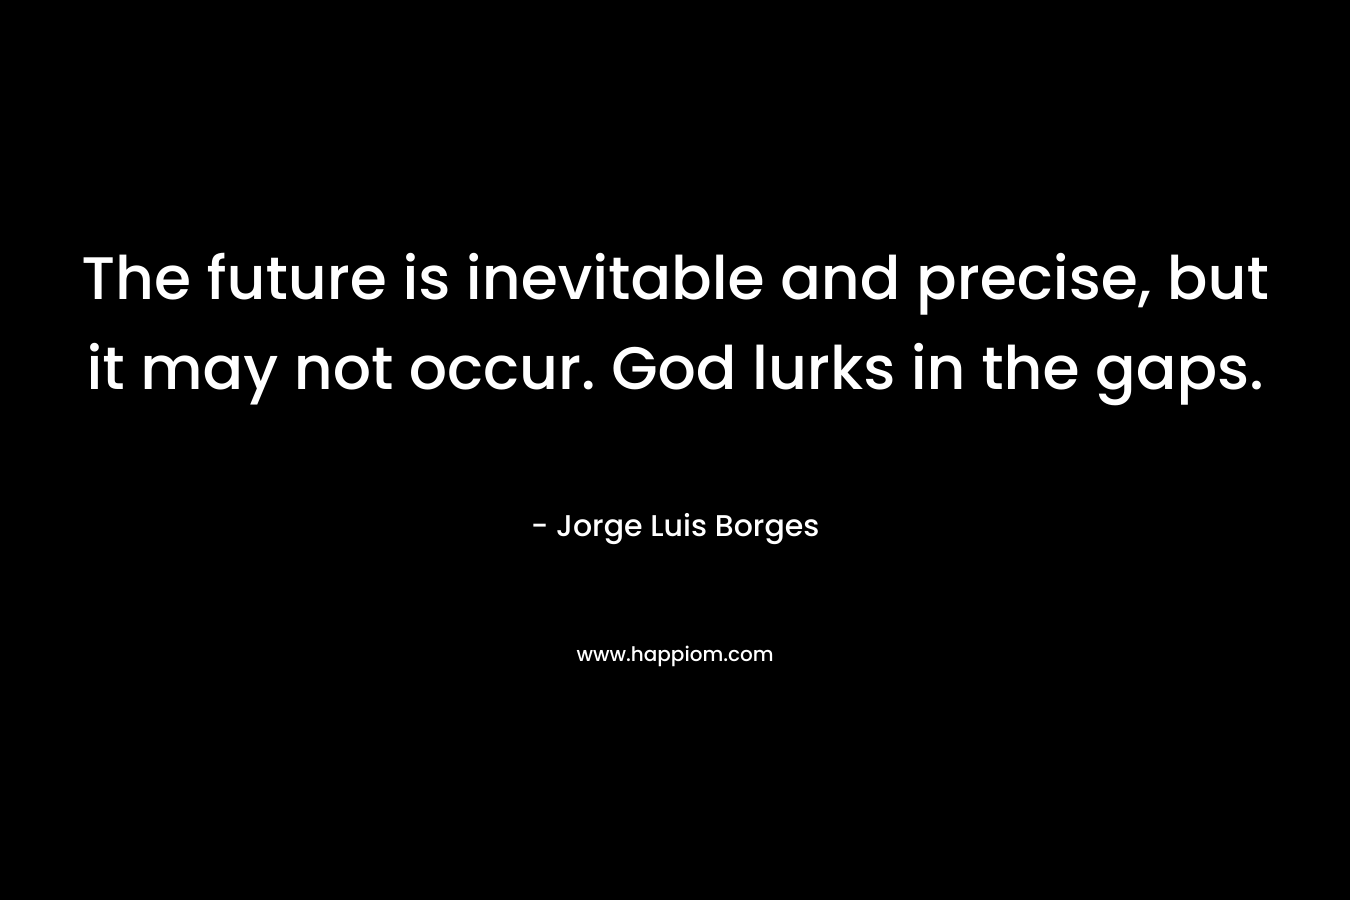 The future is inevitable and precise, but it may not occur. God lurks in the gaps. – Jorge Luis Borges